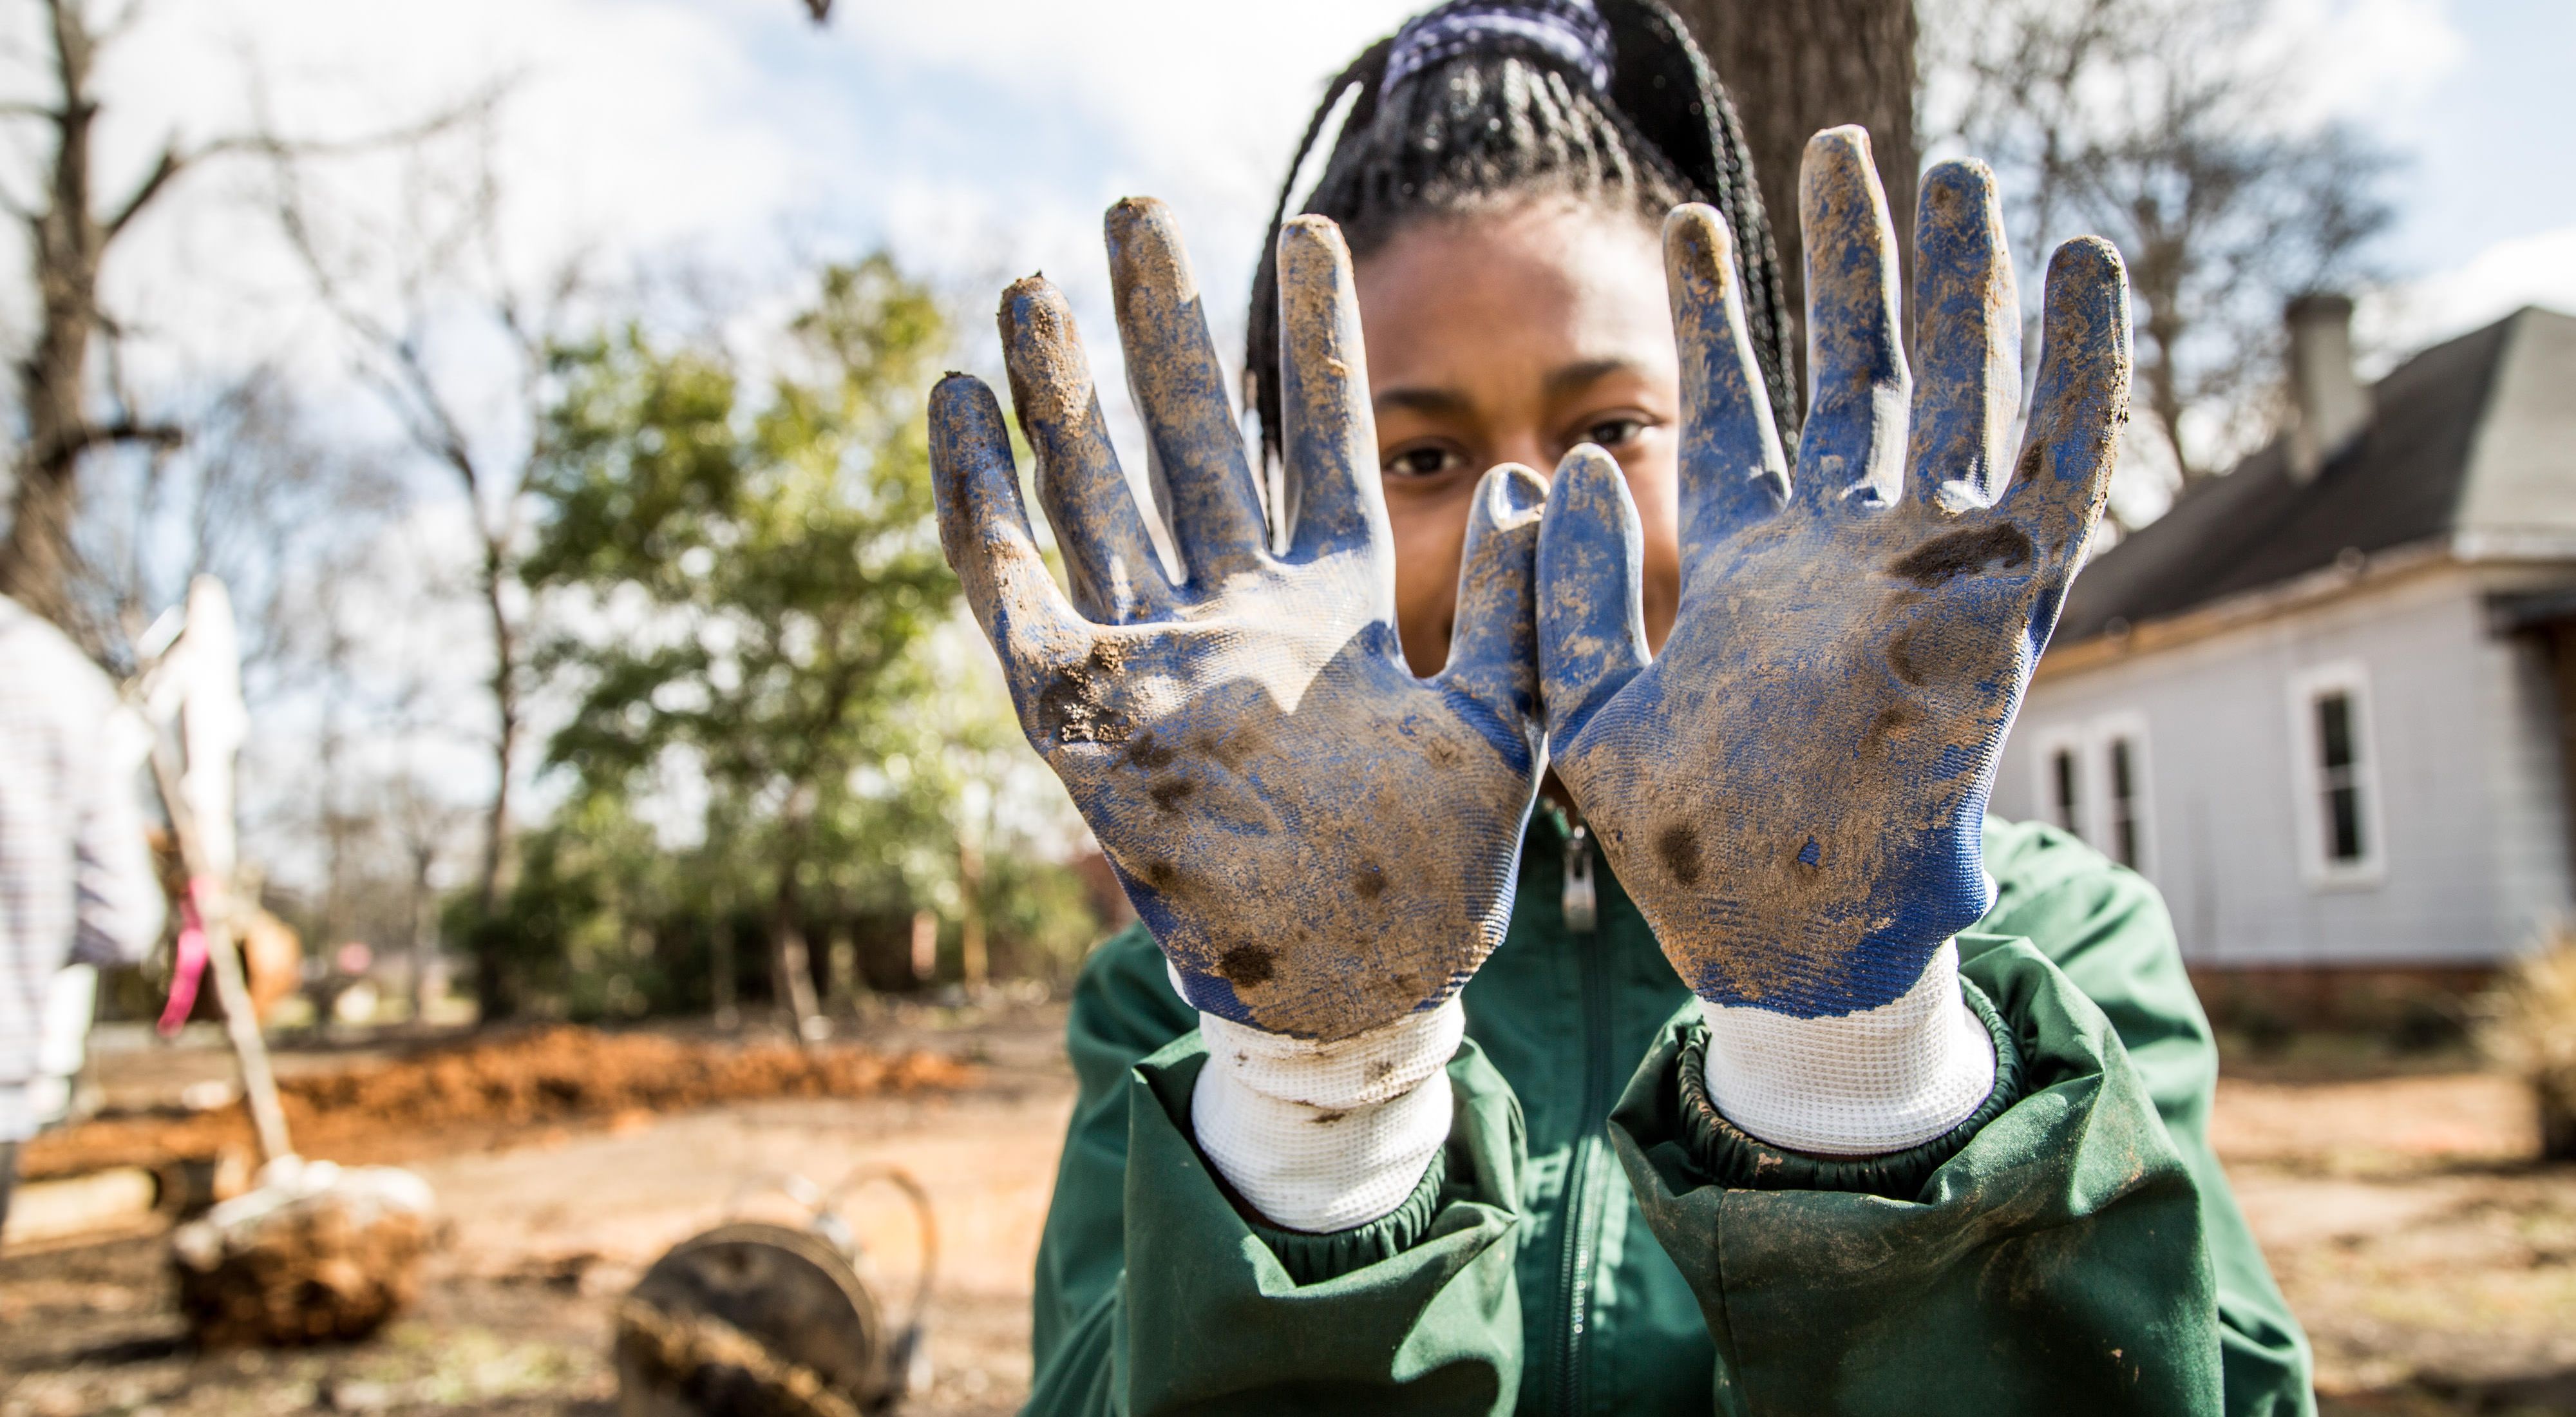 A student from historic Woodlawn High School in Birmingham, Alabama, shows off her dirty gloves from working on a "conservation lab." A "conservation lab" is vacant land converted into productive land for pollinators, birds, biodiversity, stormwater treatment demo areas, and generational care for the environment. These labs are low maintenance and a low-impact design.